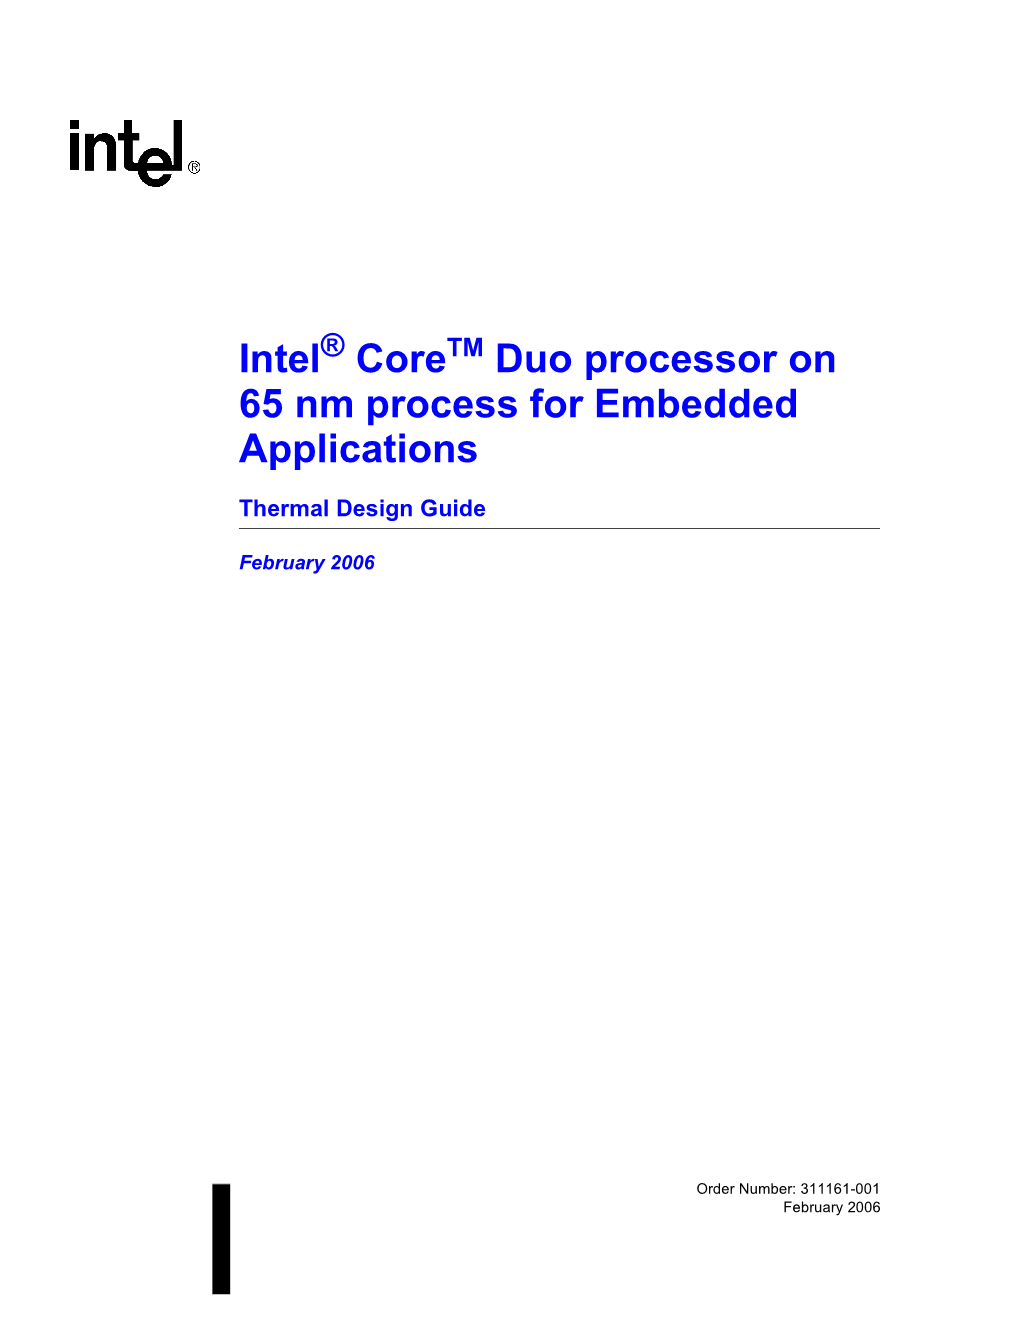 Intel® Coretm Duo Processor on 65 Nm Process for Embedded Applications